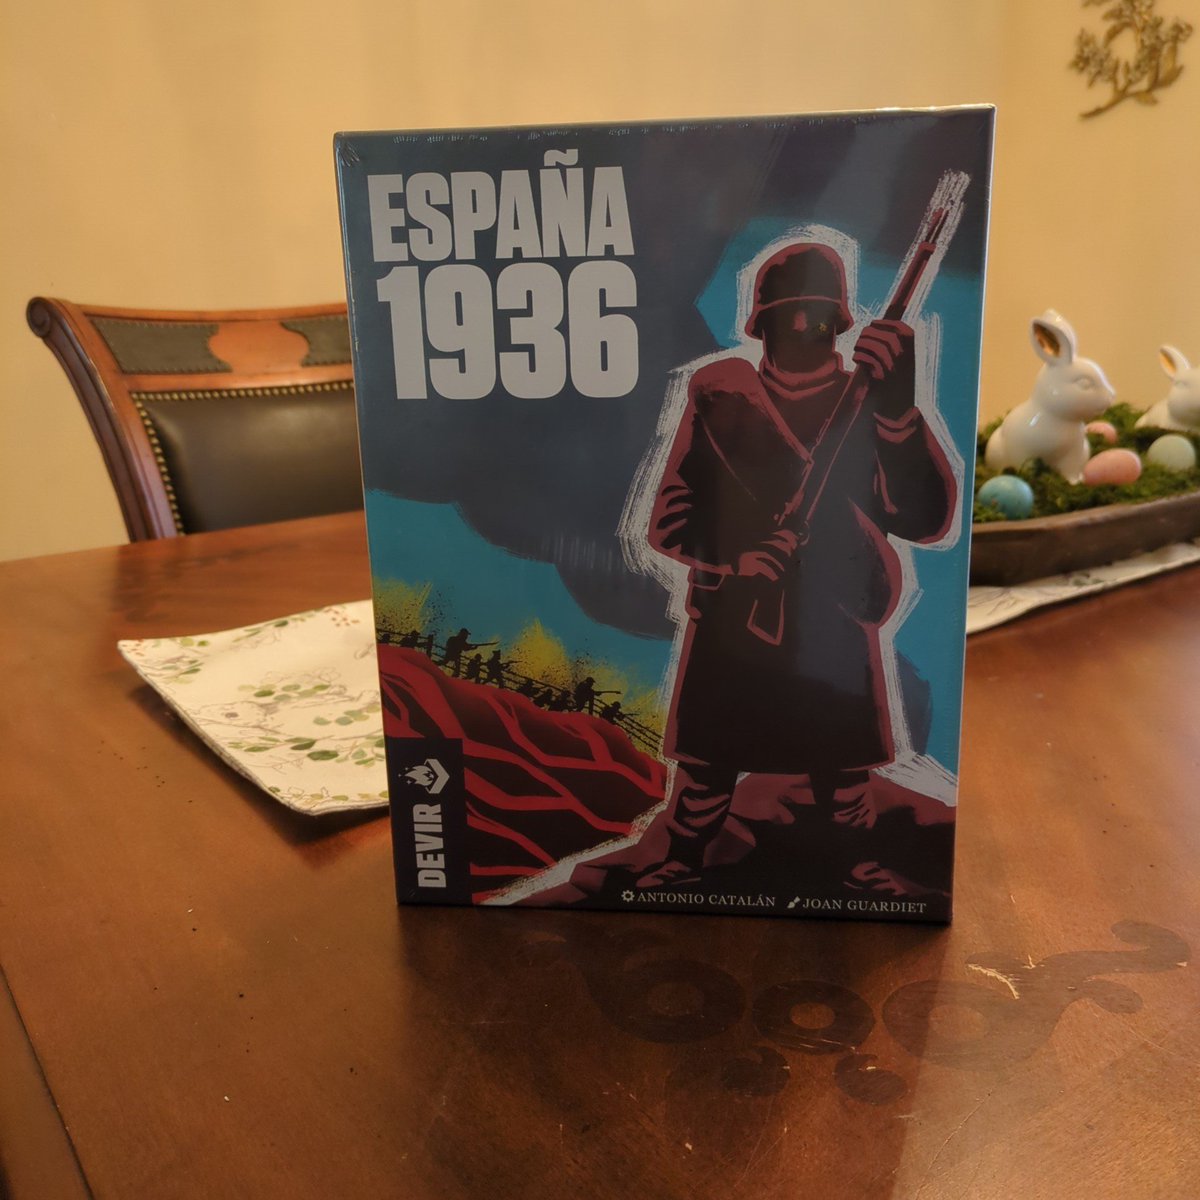 I never played the original, so I look forward to trying out this historical game from @devirgames